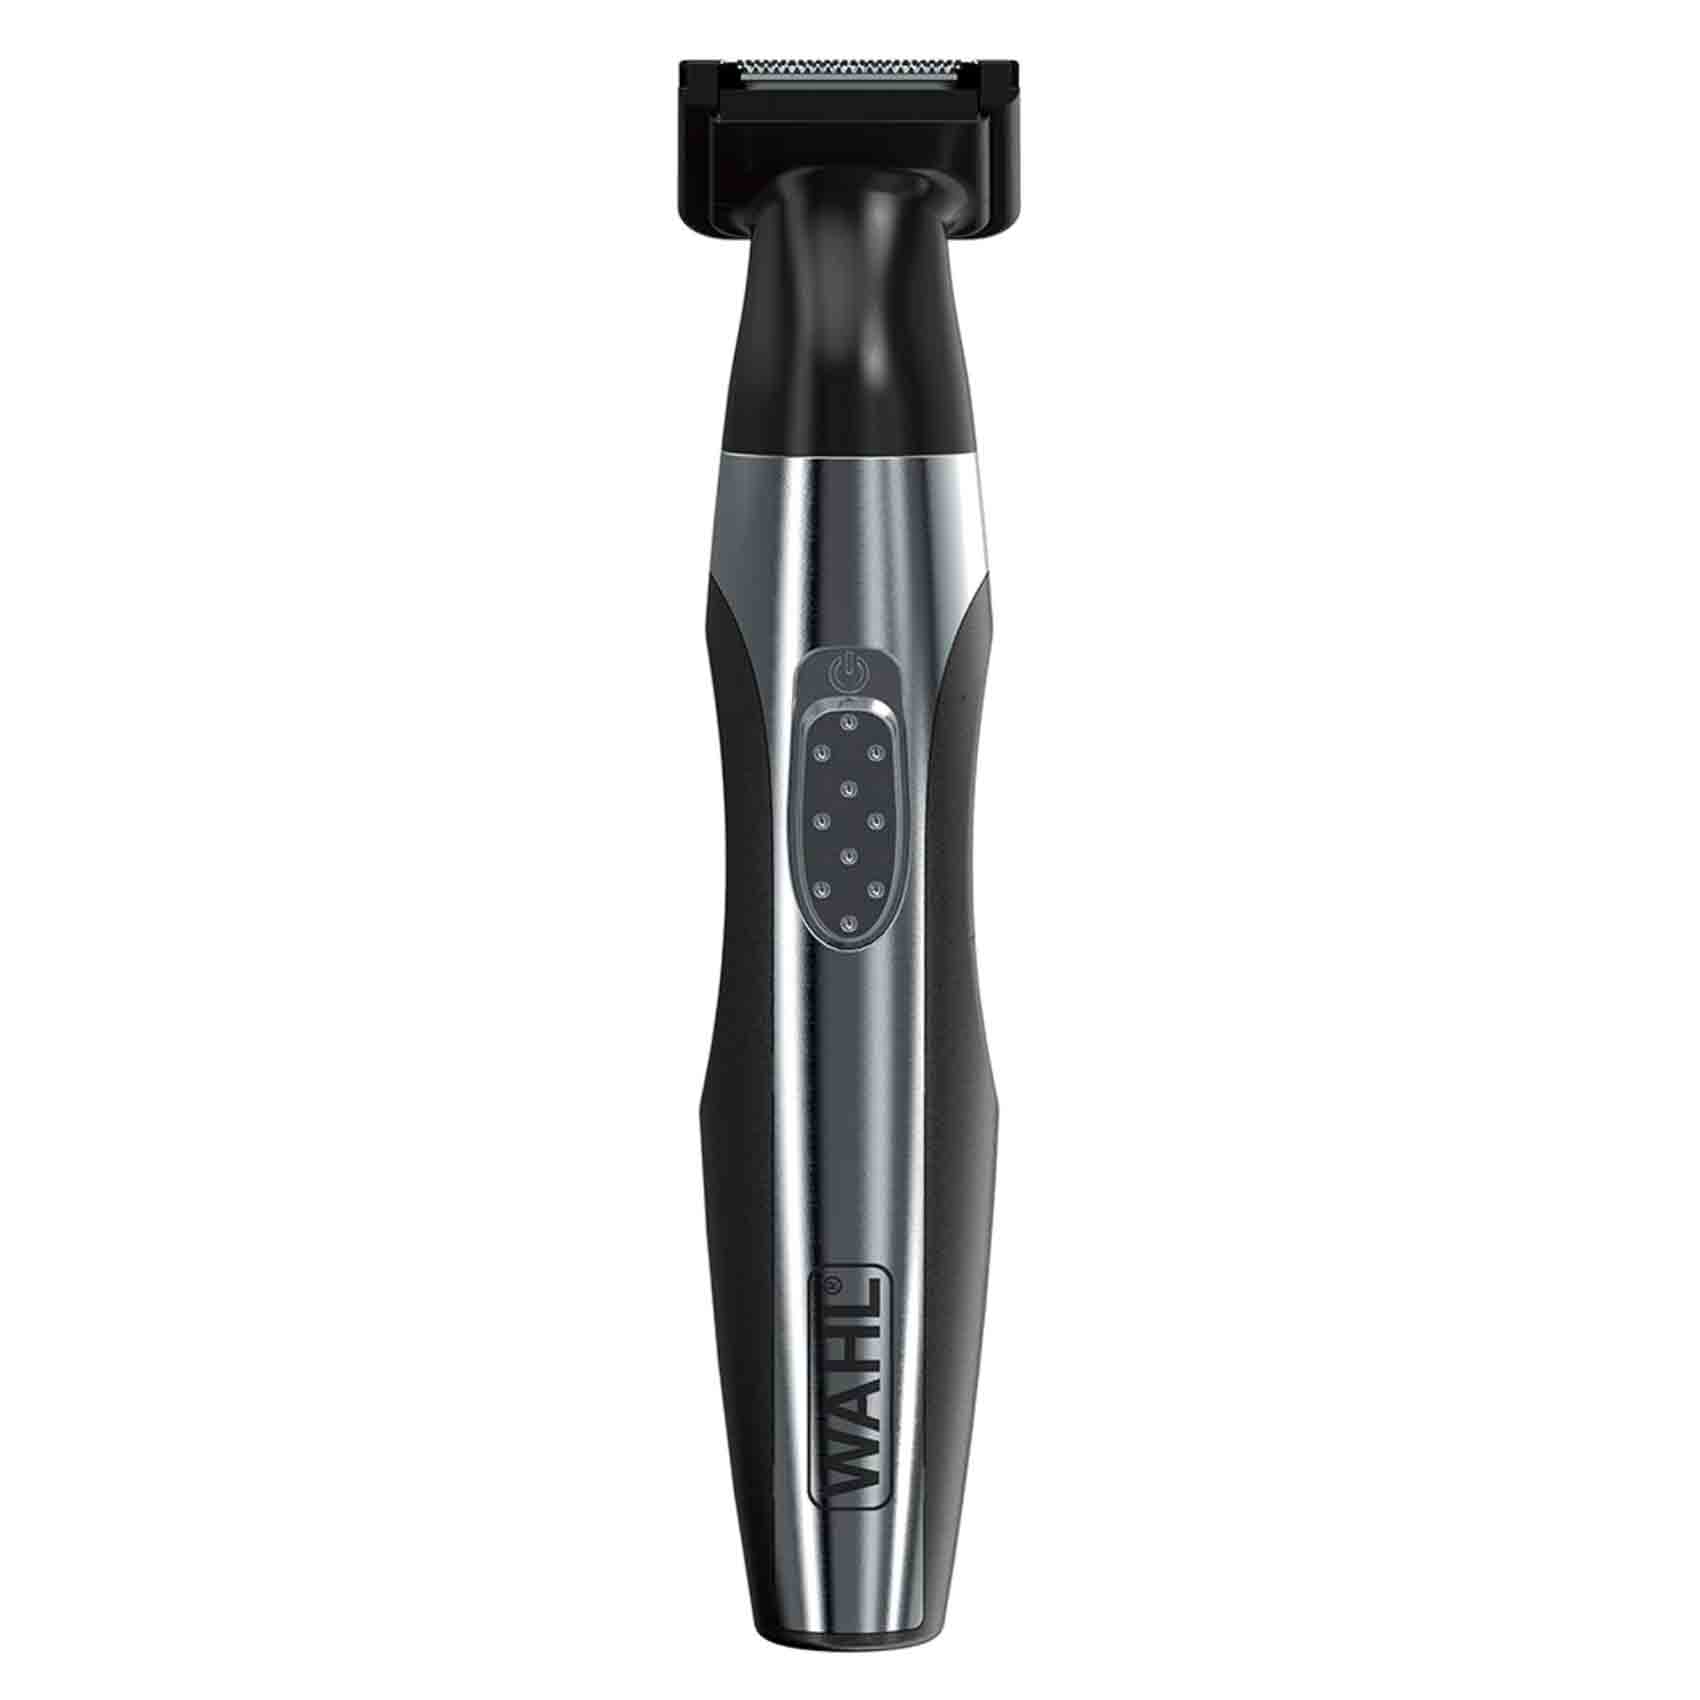 Wahl Deluxe Travel Kit Trimmer